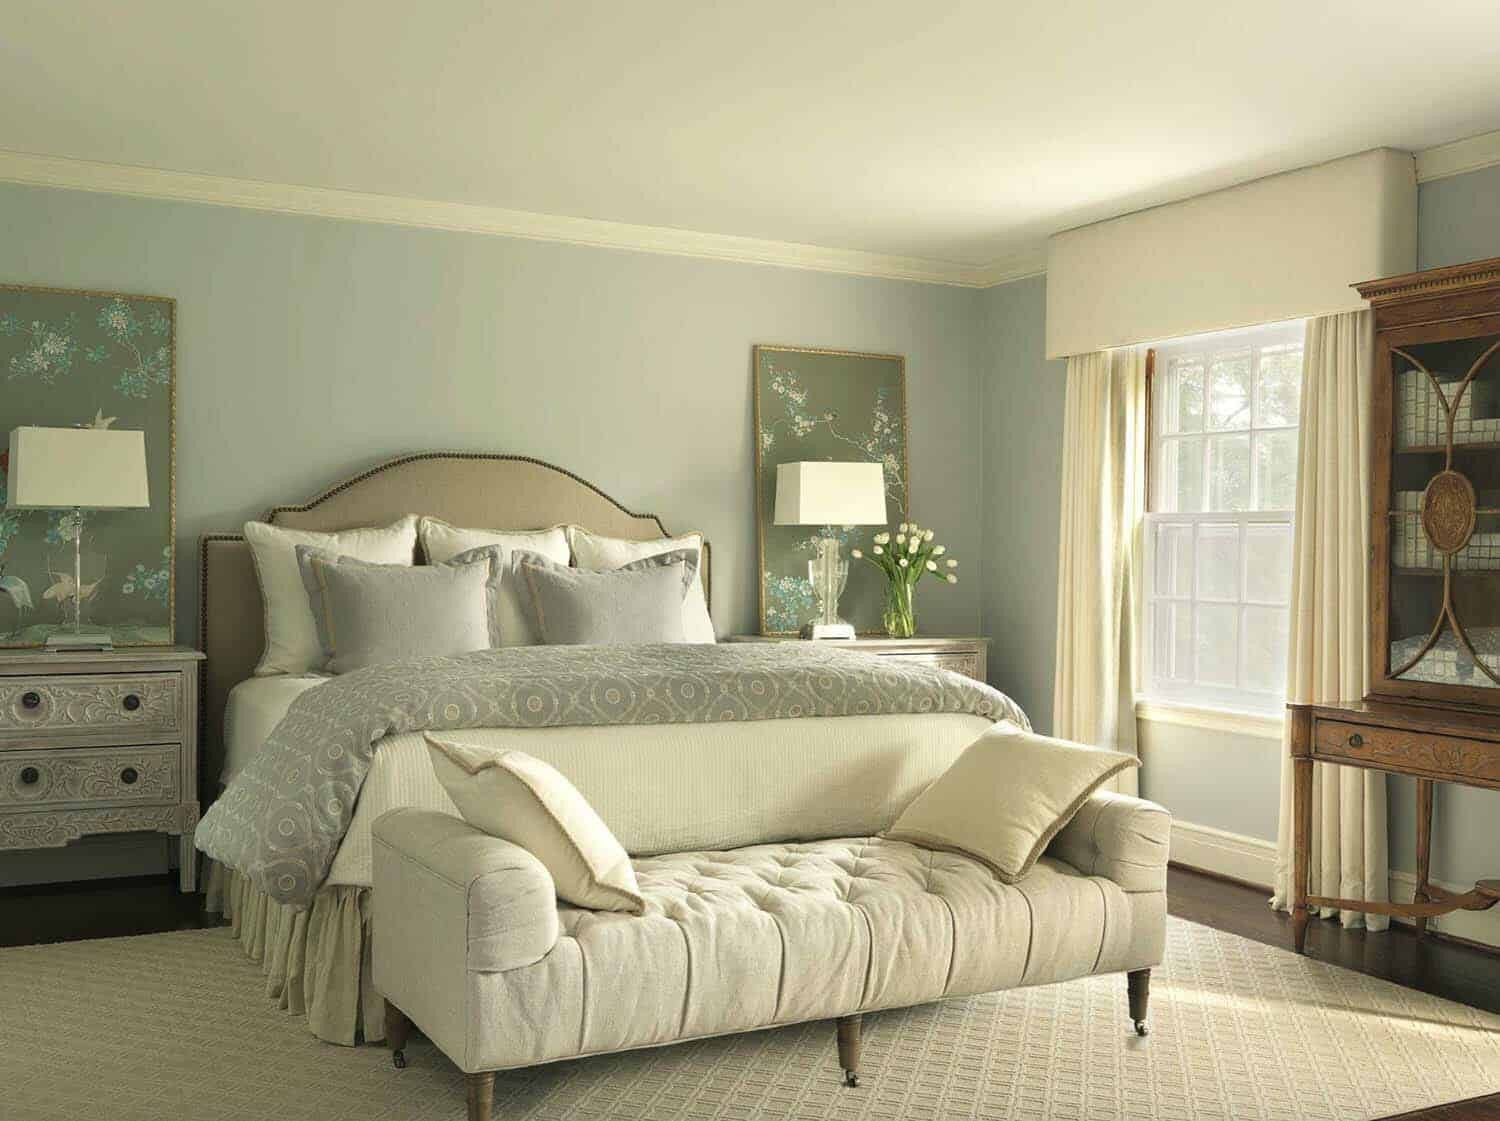 Master Bedroom Wall Colors
 25 Absolutely stunning master bedroom color scheme ideas